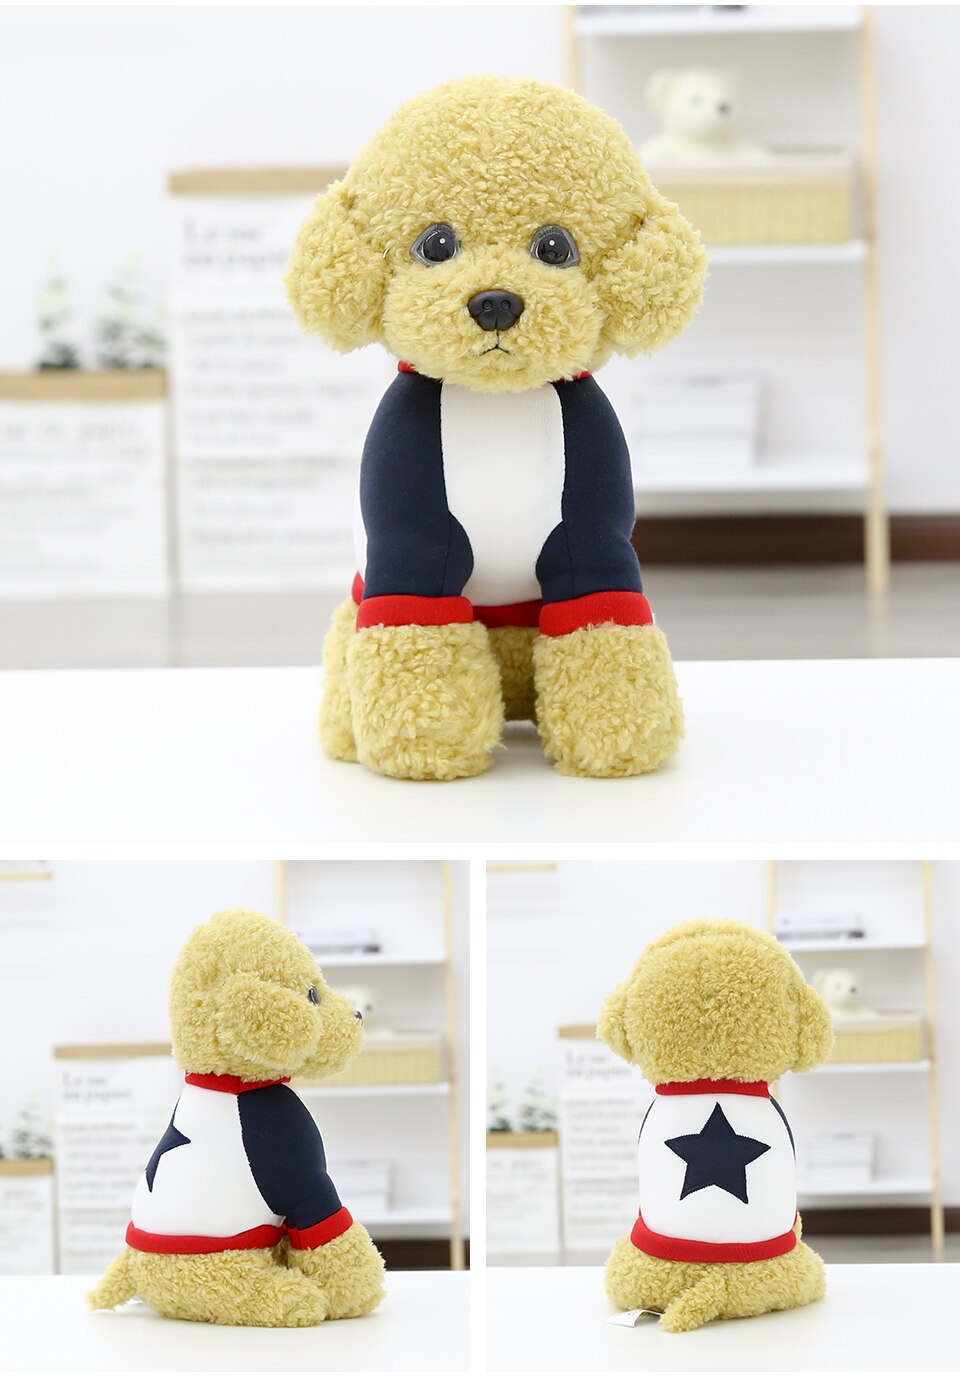 Little Poodle Dog Plush Toy Girl Birthday Present Doesn't Shed Hair New 25cm Kawaii Simulation Cute Christmas Gift for Kids